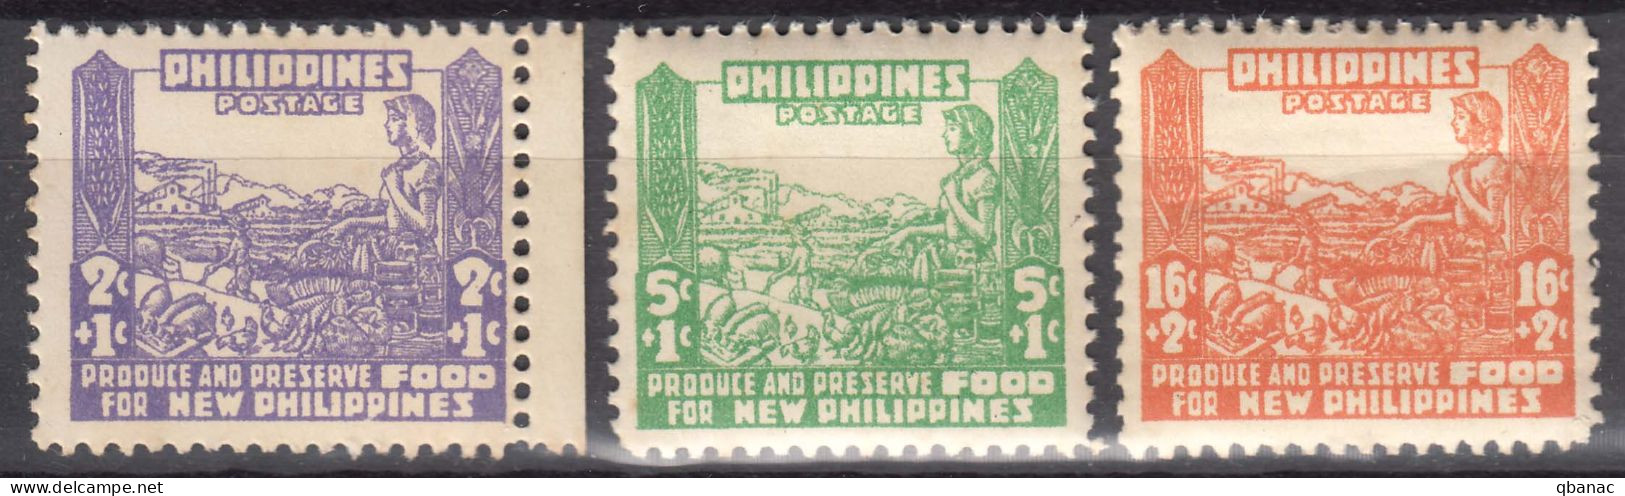 Philippines 1942 Japanese Occupation Red Cross Charity Set Mi#9-11 Mint Never Hinged - Filippine